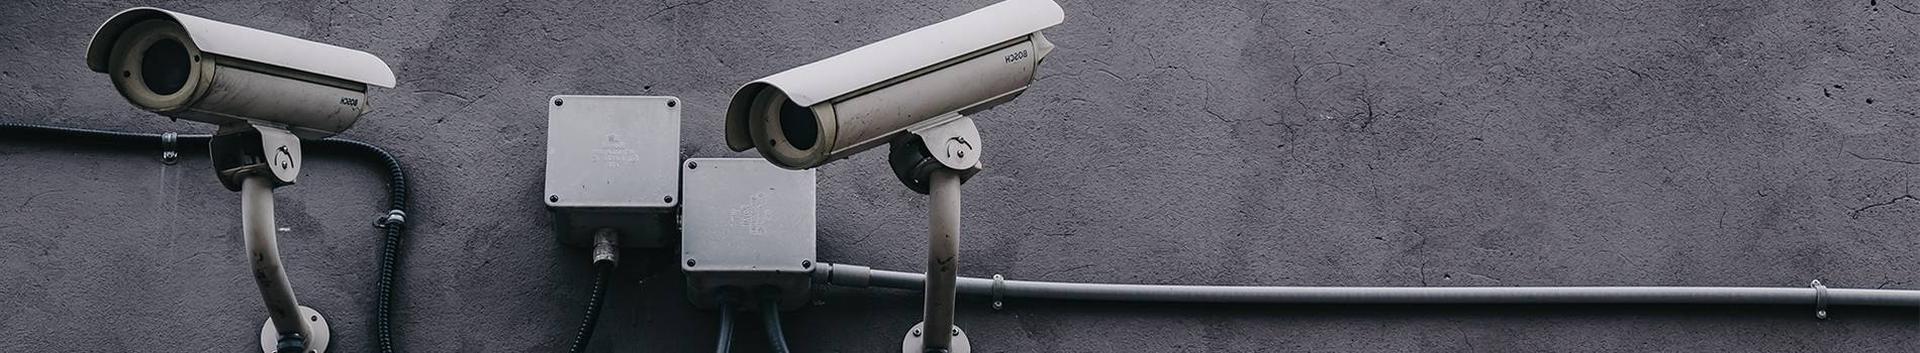 security and surveillance services, security and surveillance equipment, fire safety, Design, construction and maintenance of fire safety, surveillance systems